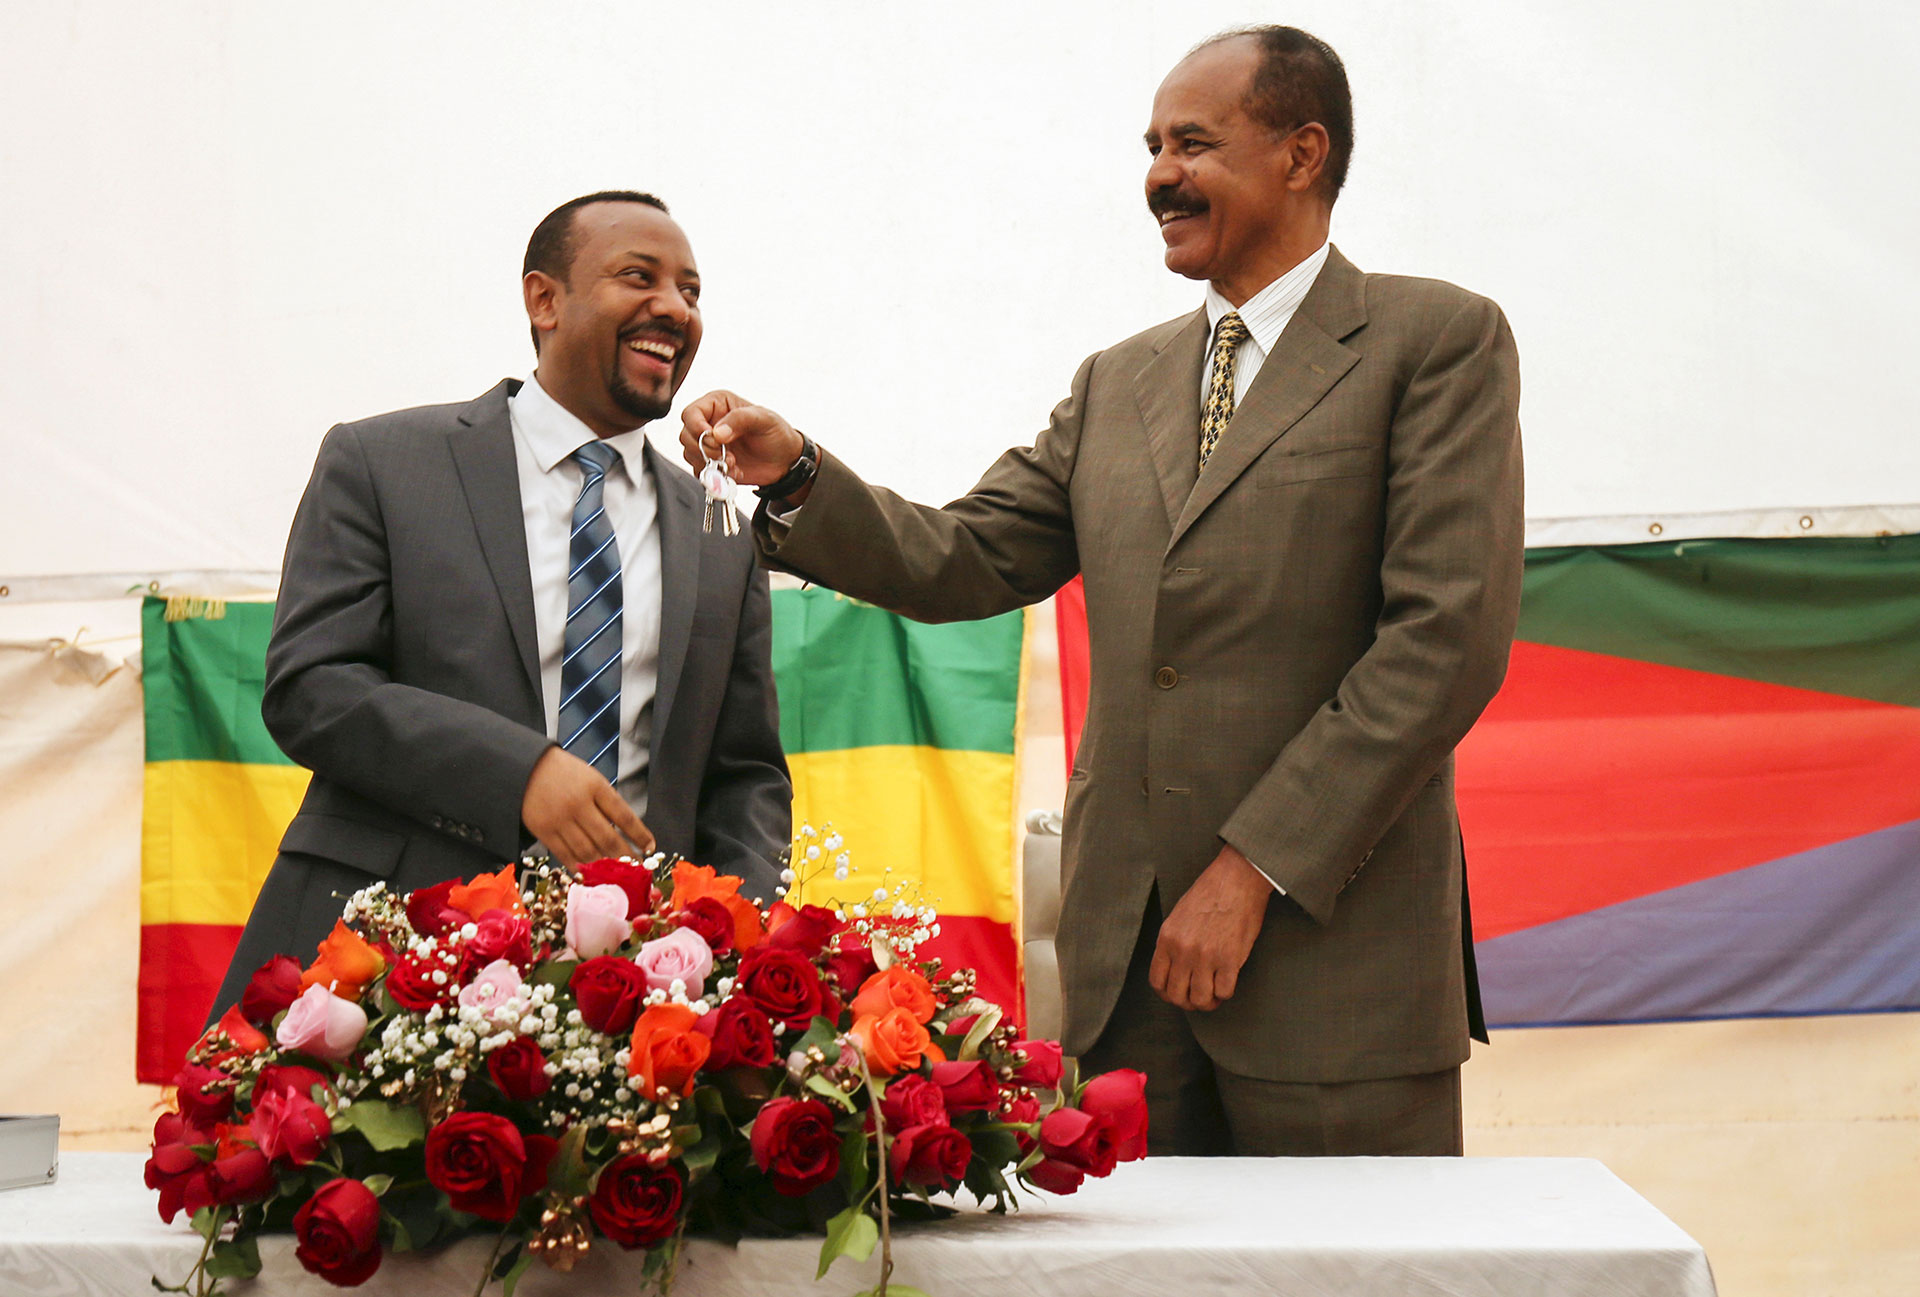 Ethiopia and Eritrea: Latest News and My Perspective